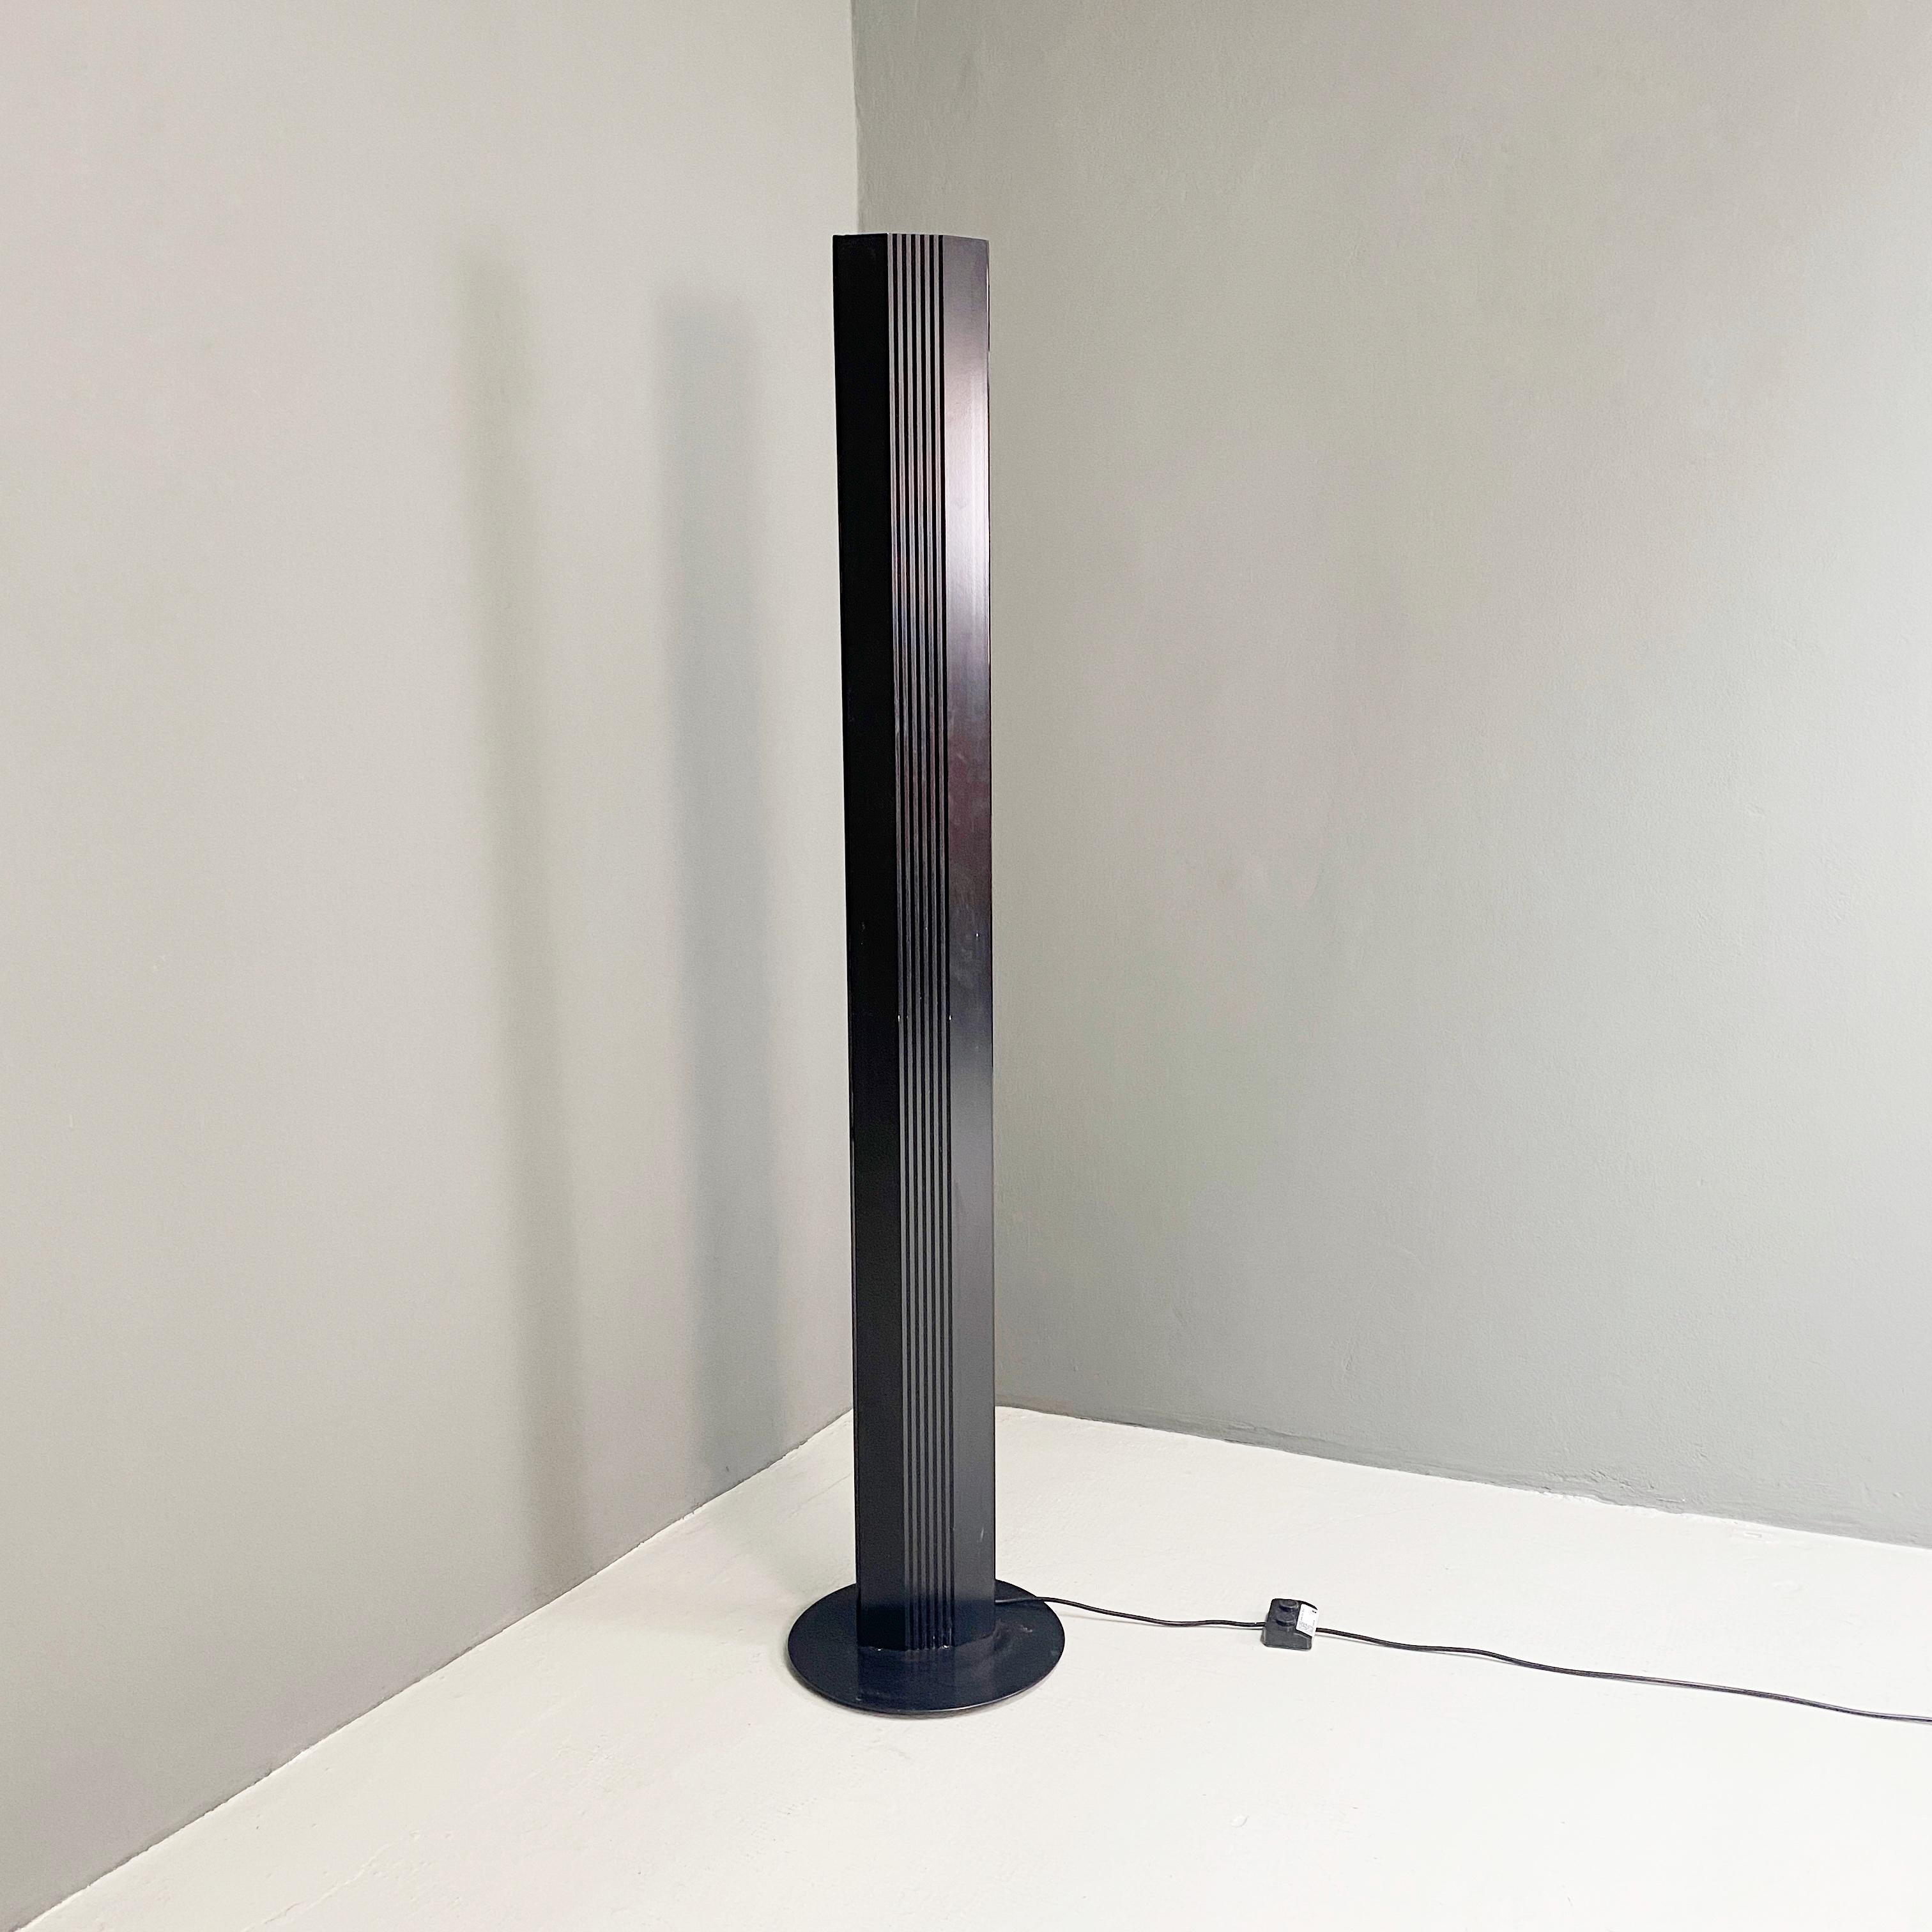 Italian Modern TOTEM Metal and Plastic Floor Lamp, 1980s In Good Condition For Sale In MIlano, IT